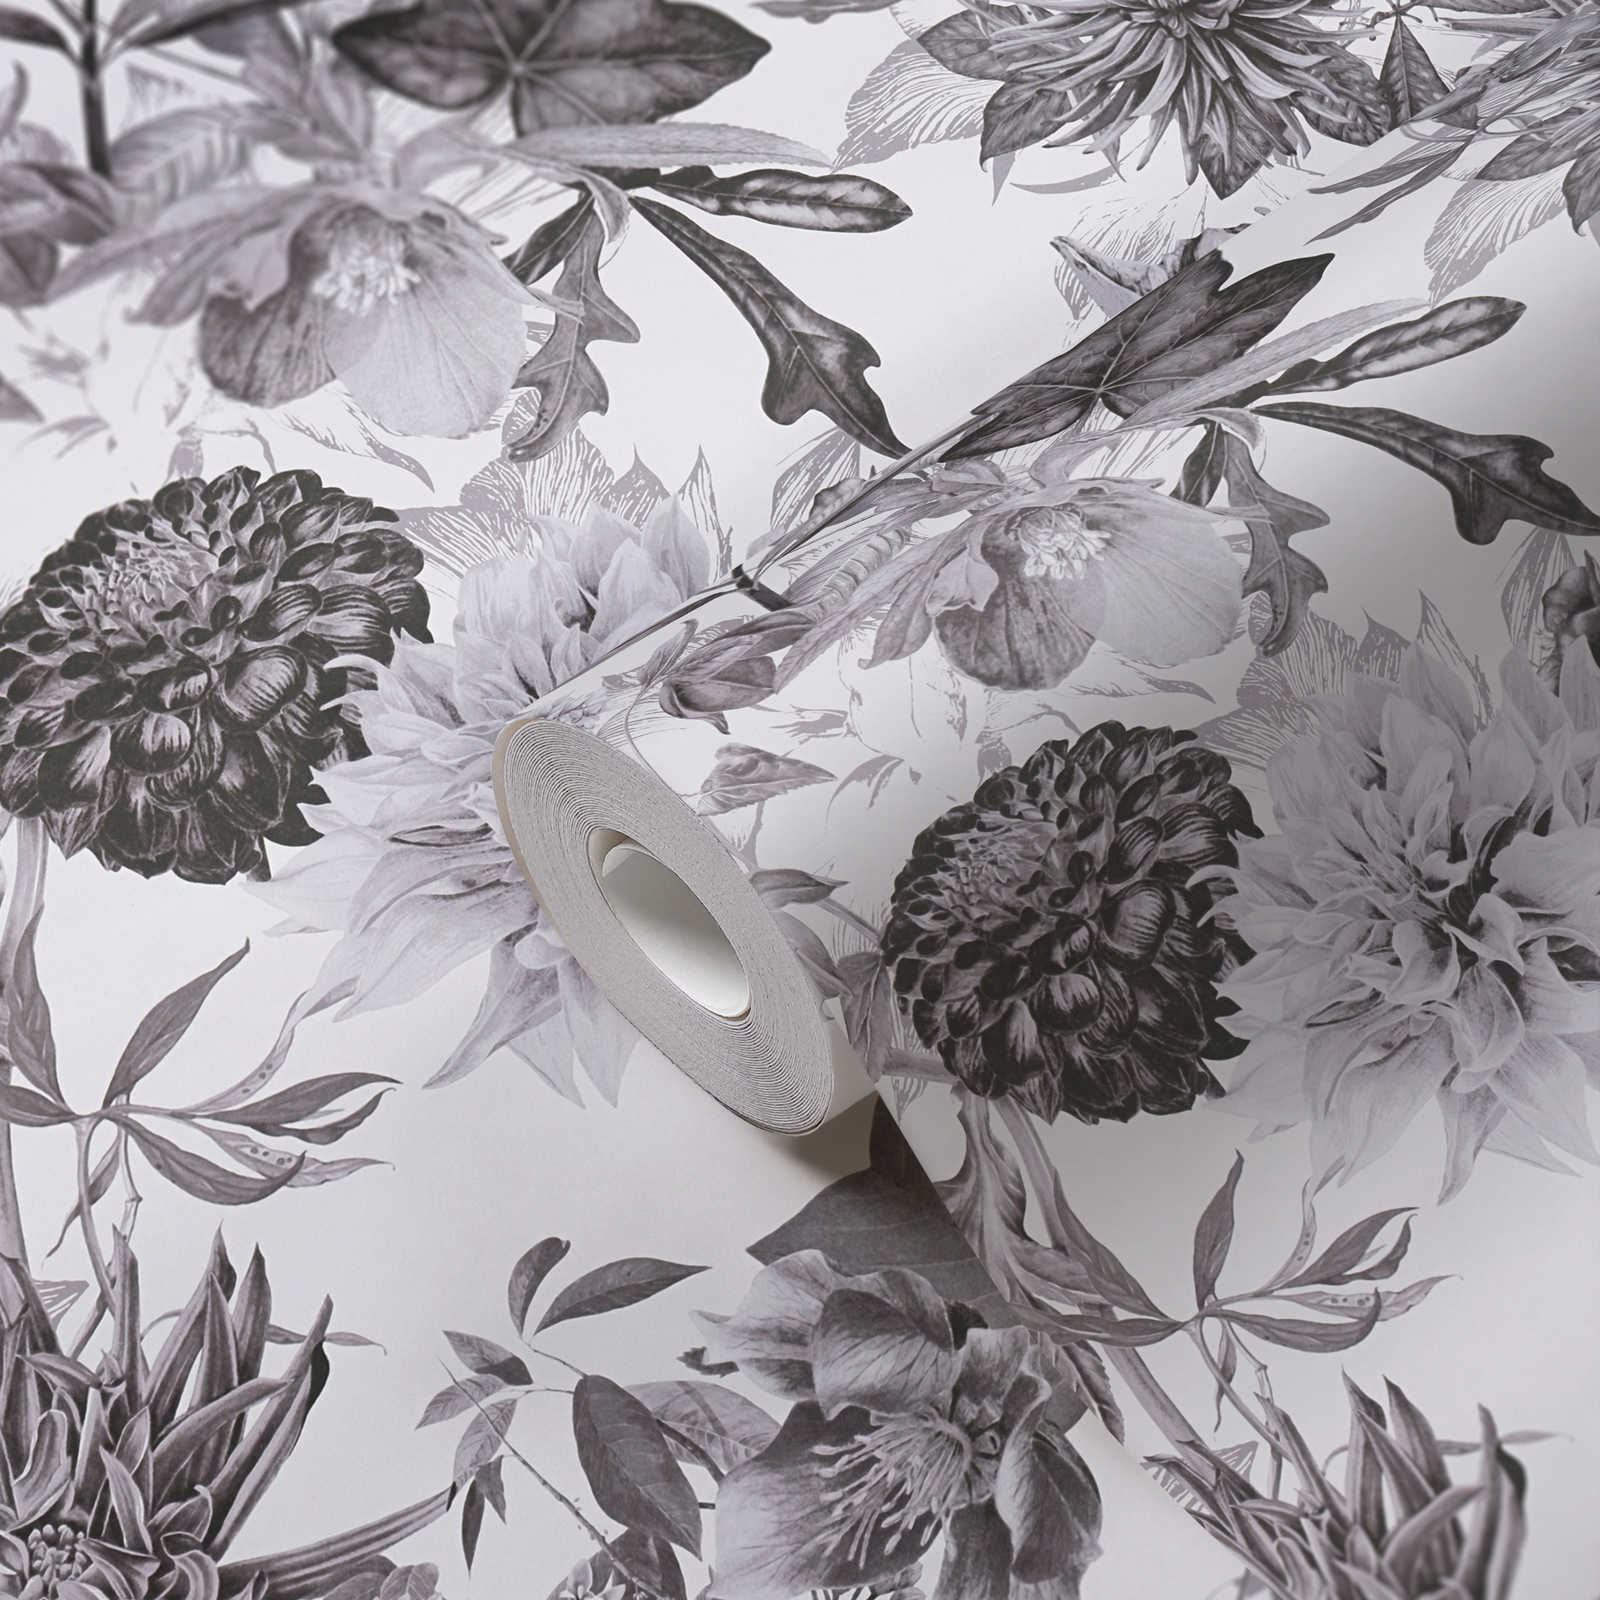             Black and white flowers wallpaper with floral pattern
        